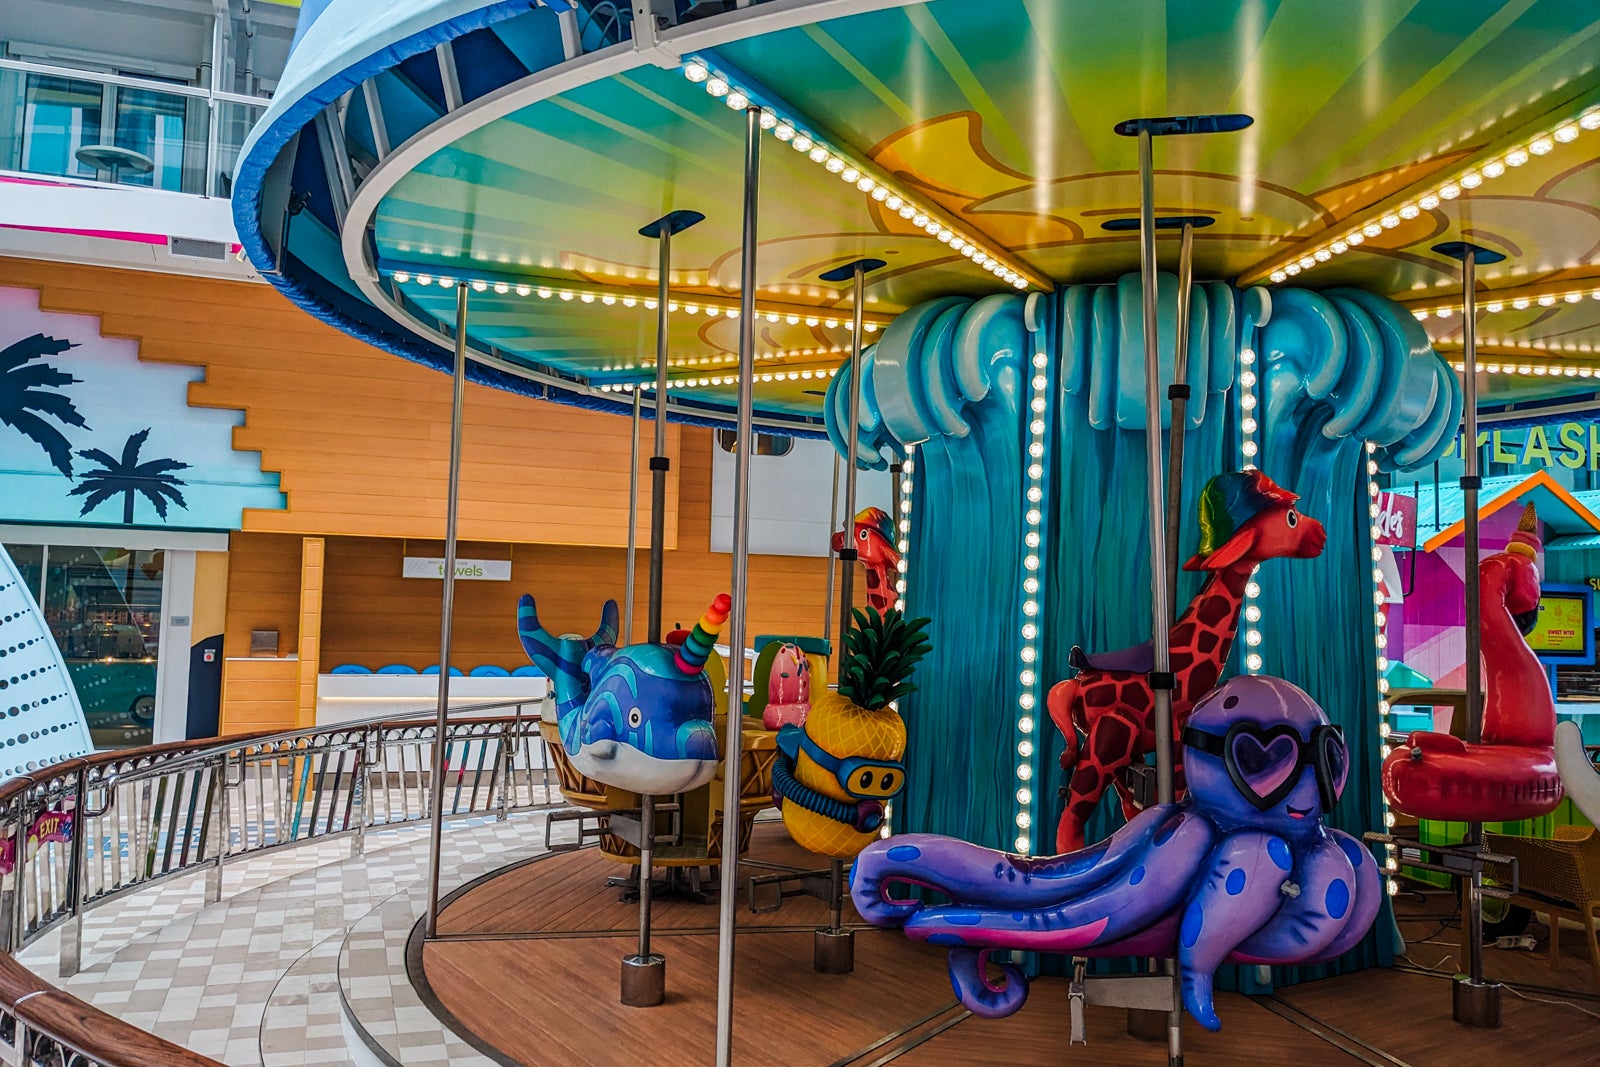 Surfside carousel with whimsical sea creatures